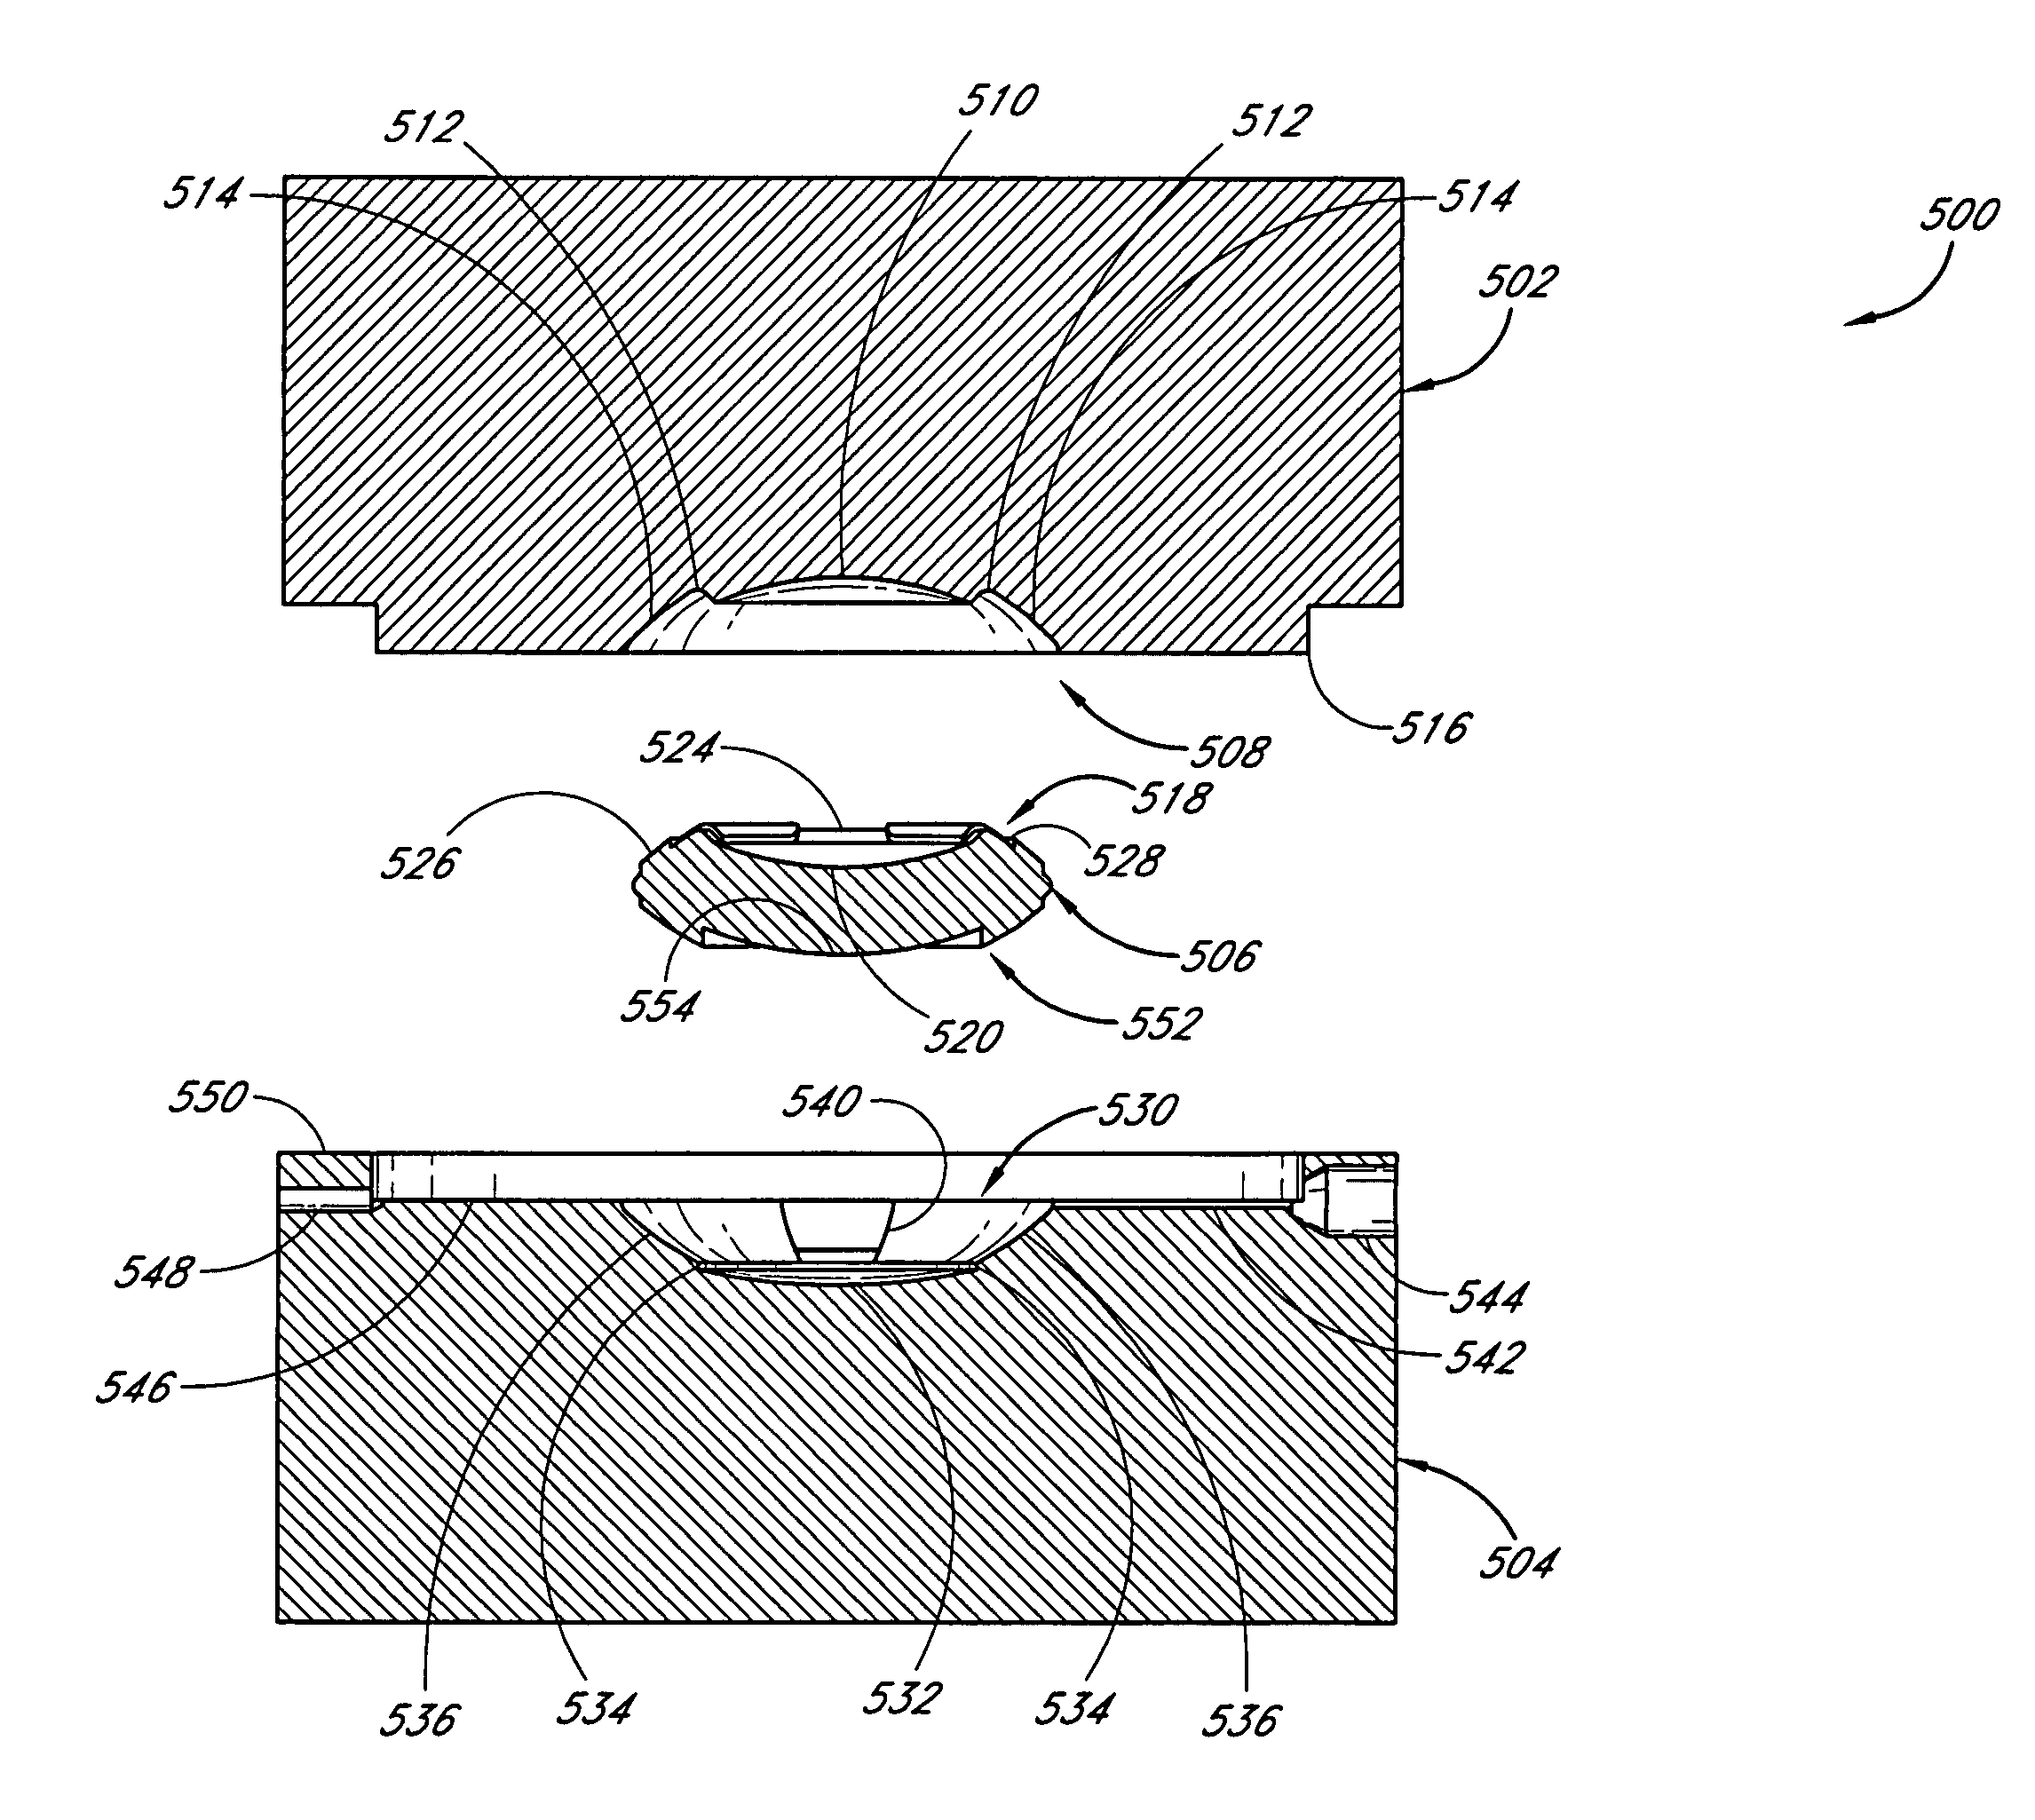 Single-piece accommodating intraocular lens system